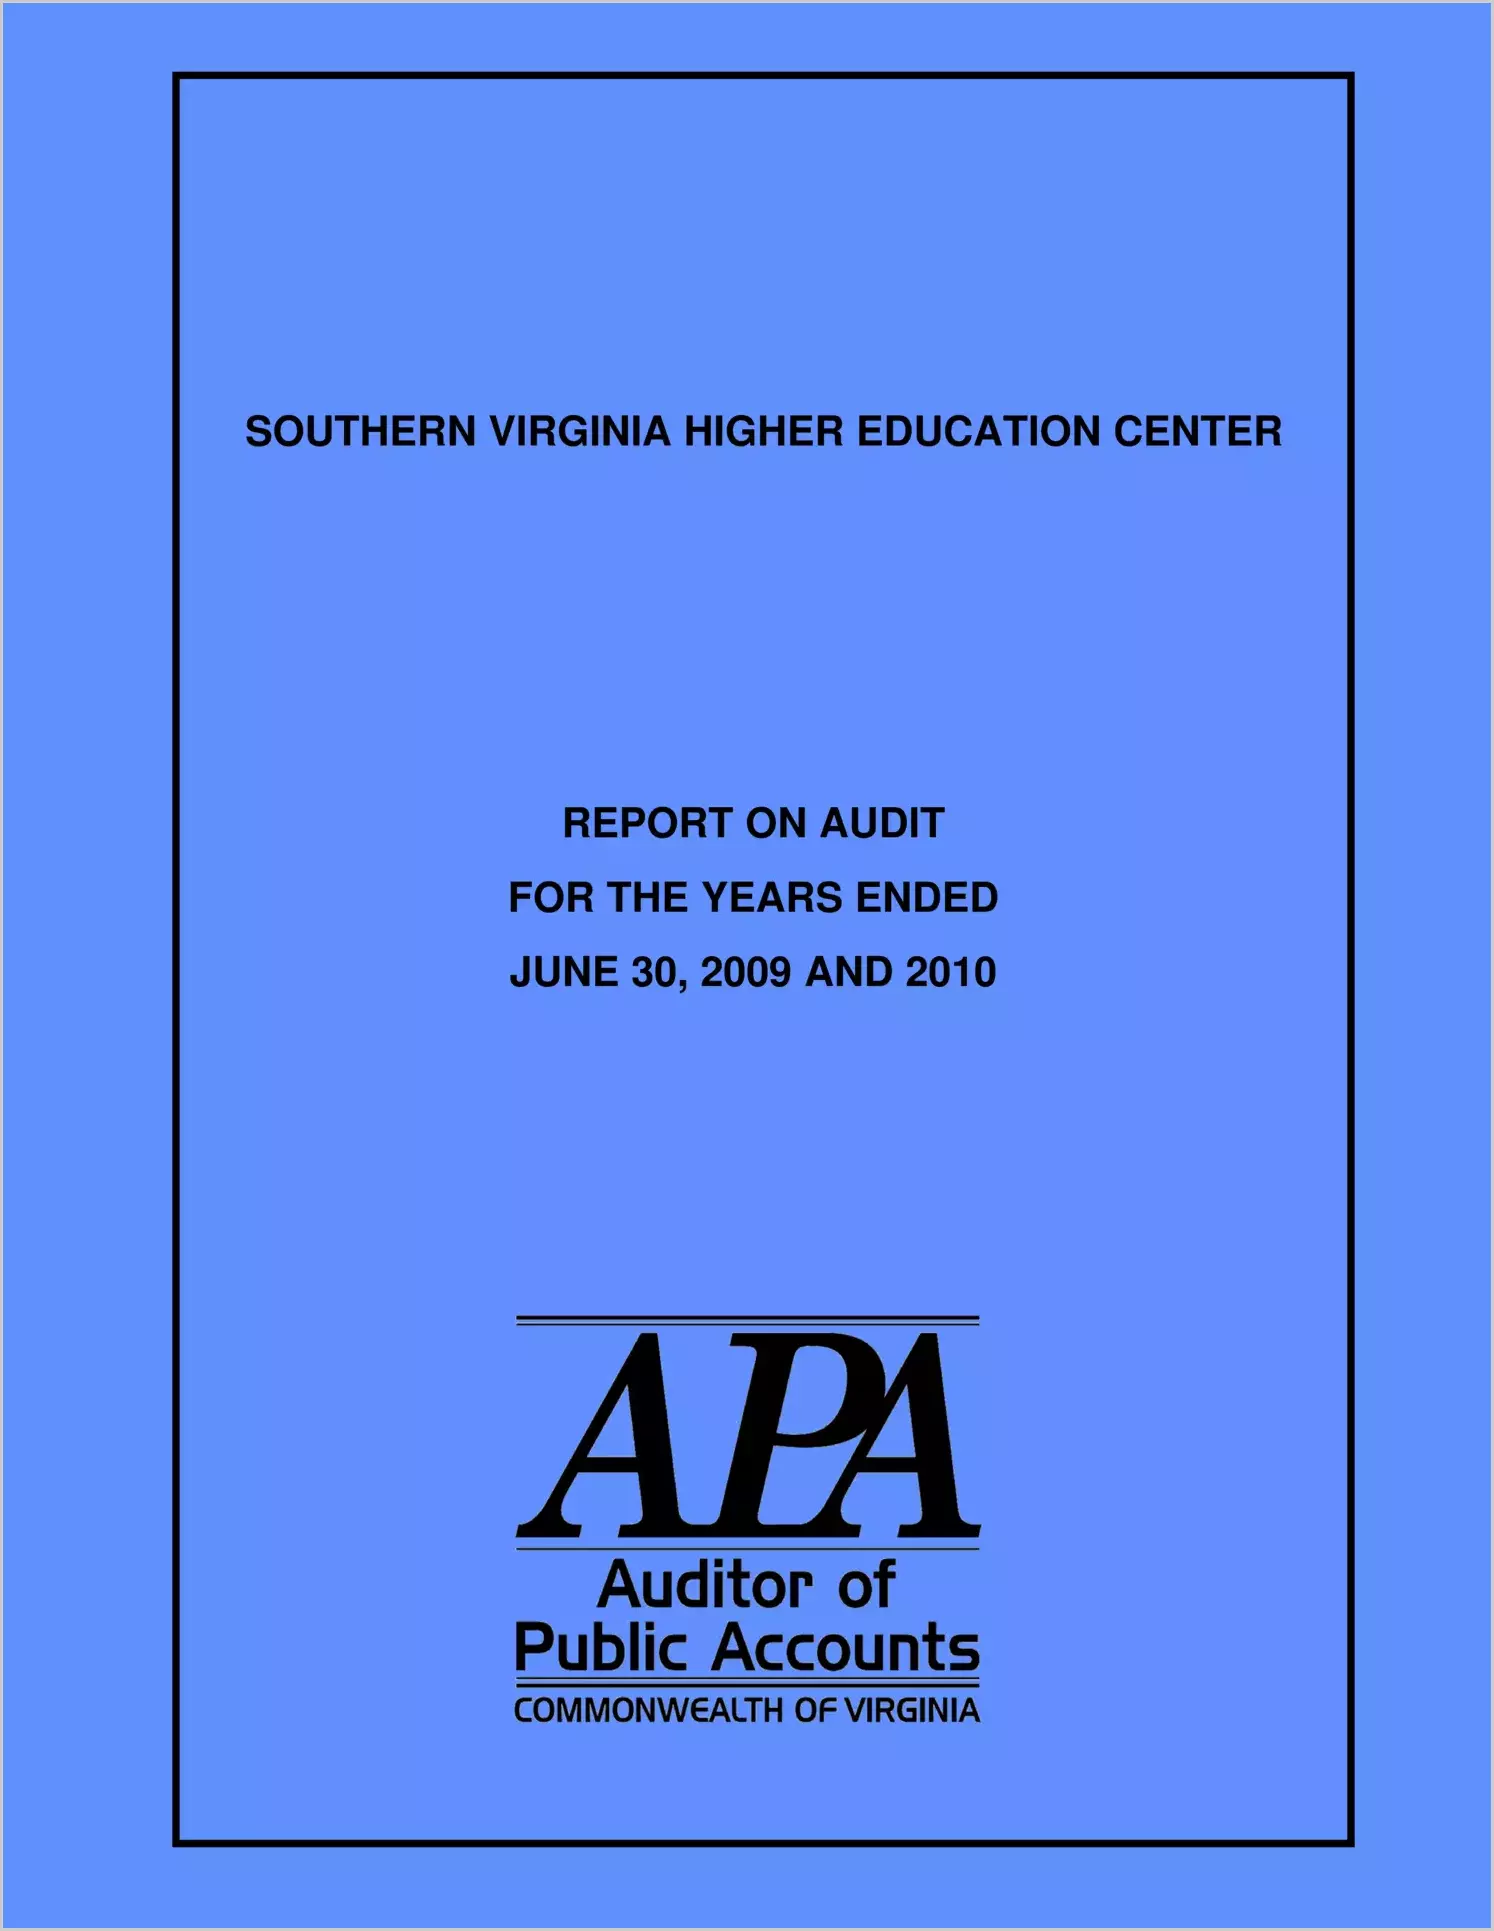 Southern Virginia Higher Education Center for the years ended June 30, 2009 and June 30, 2010